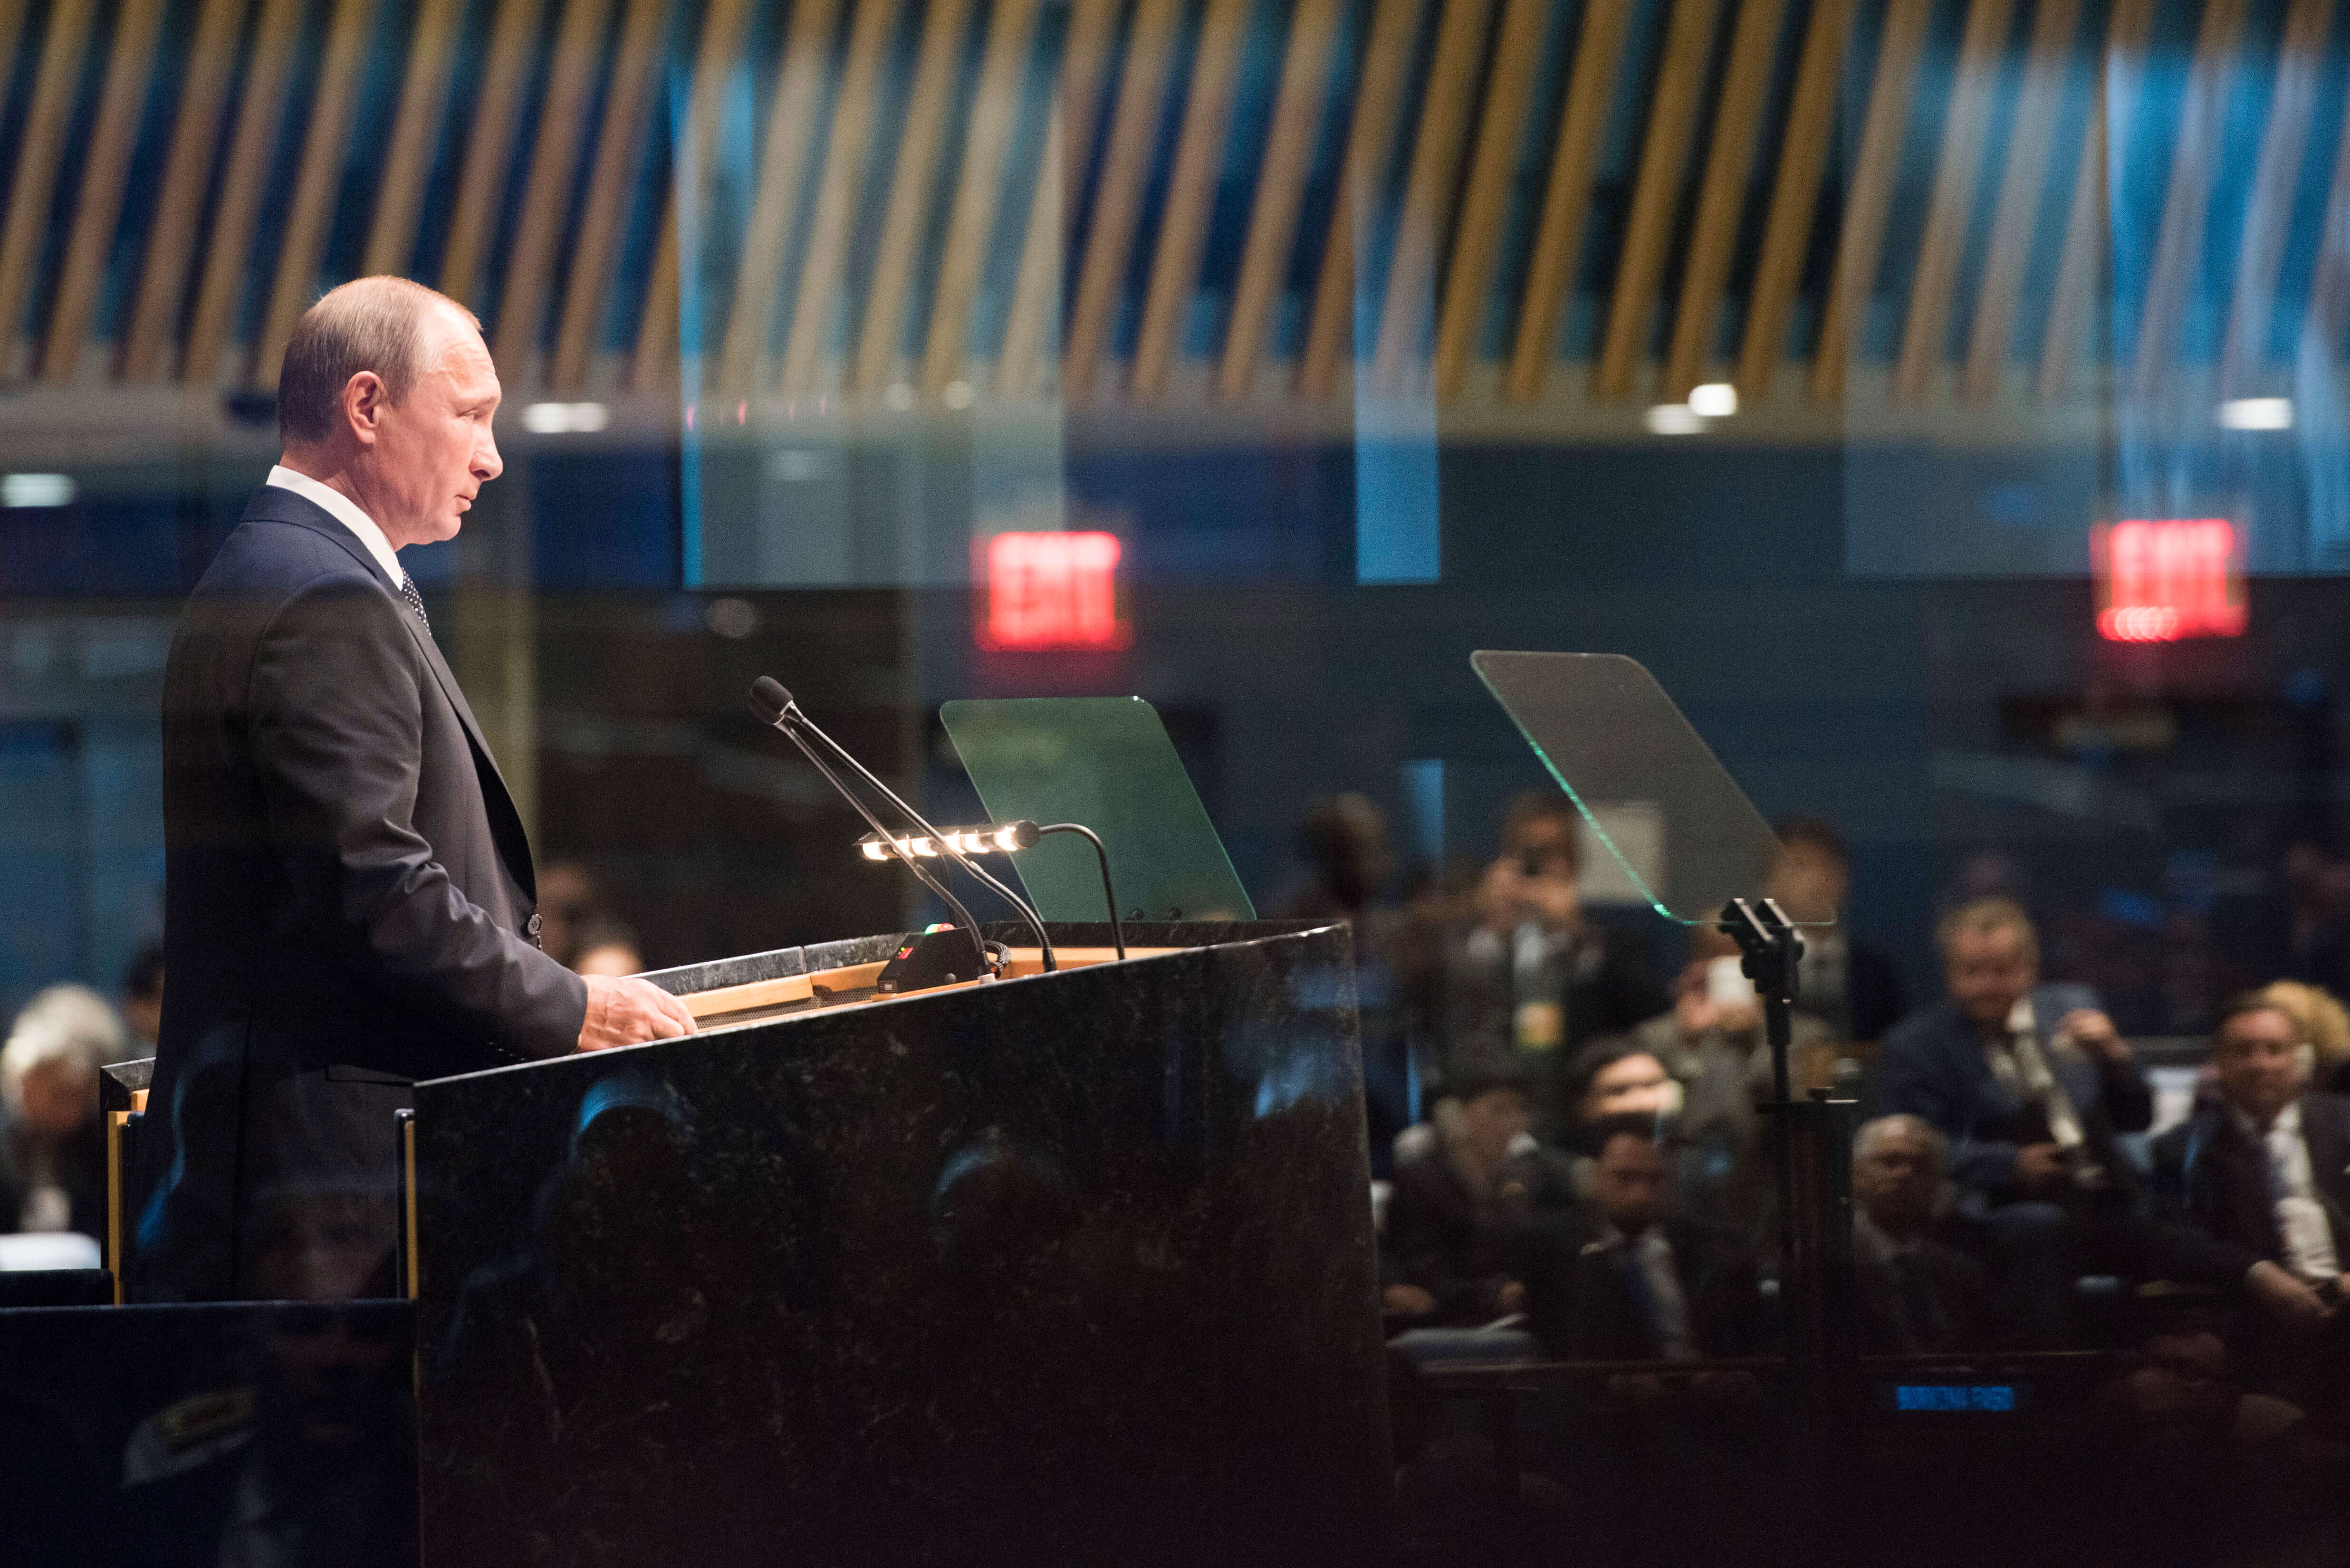 Dams-Russian President Vladimir Putin at the 70th Annual General Assembley Debate of the United Nations. © United Nations Photo - Flickr